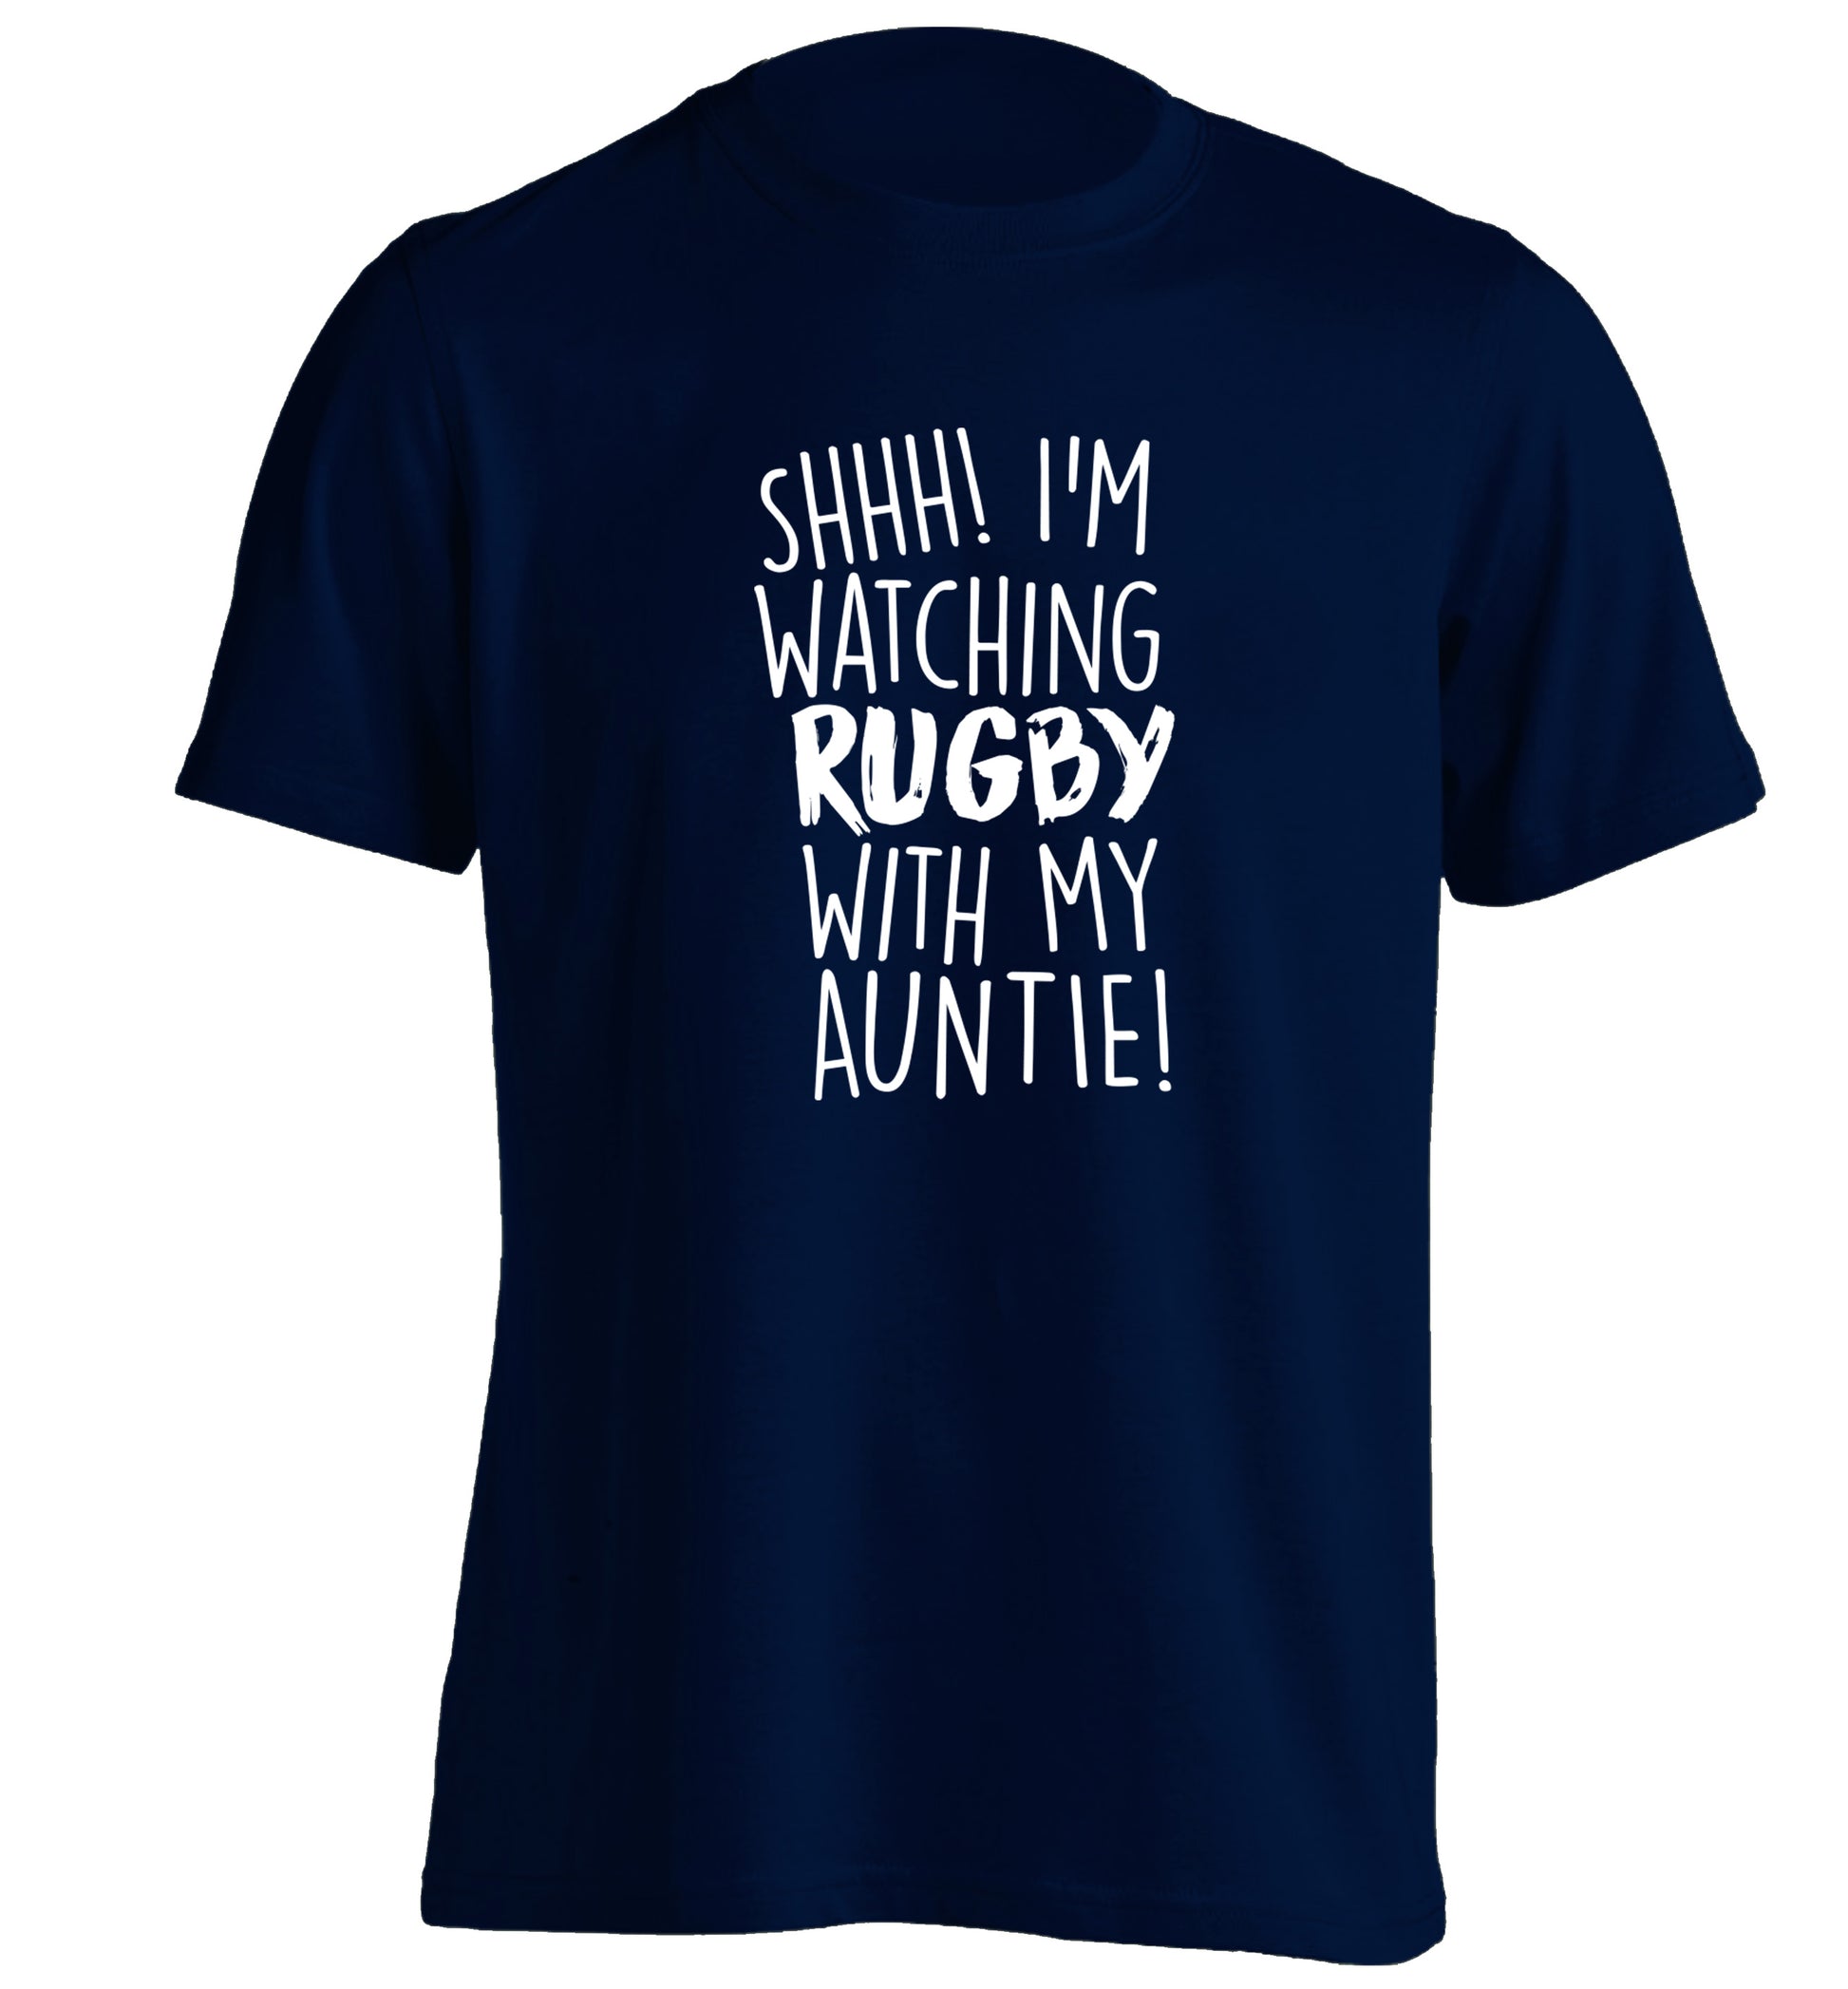 Shhh I'm watchin rugby with my auntie adults unisex navy Tshirt 2XL